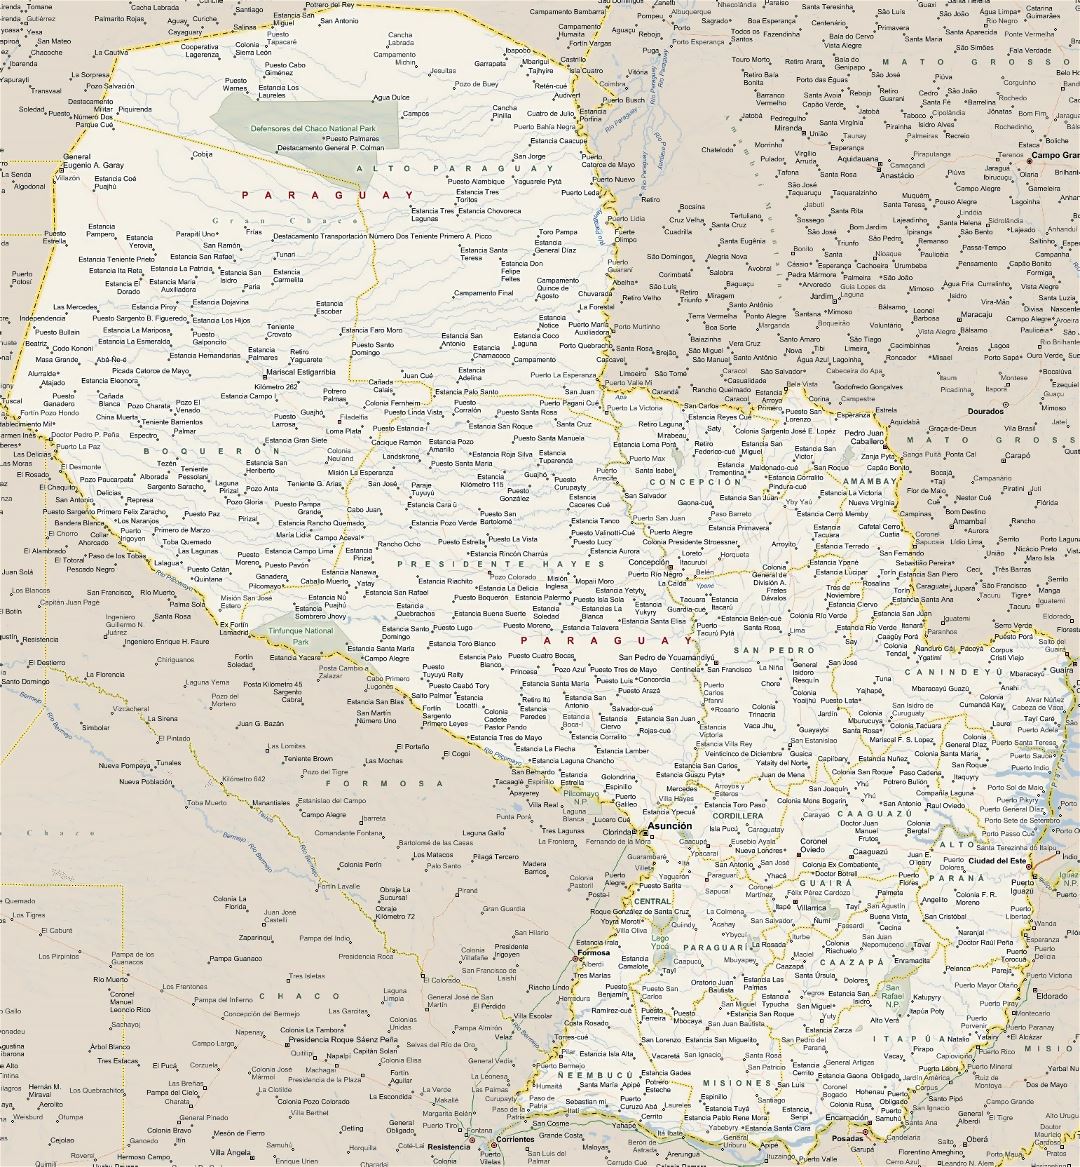 Large map of Paraguay with all cities